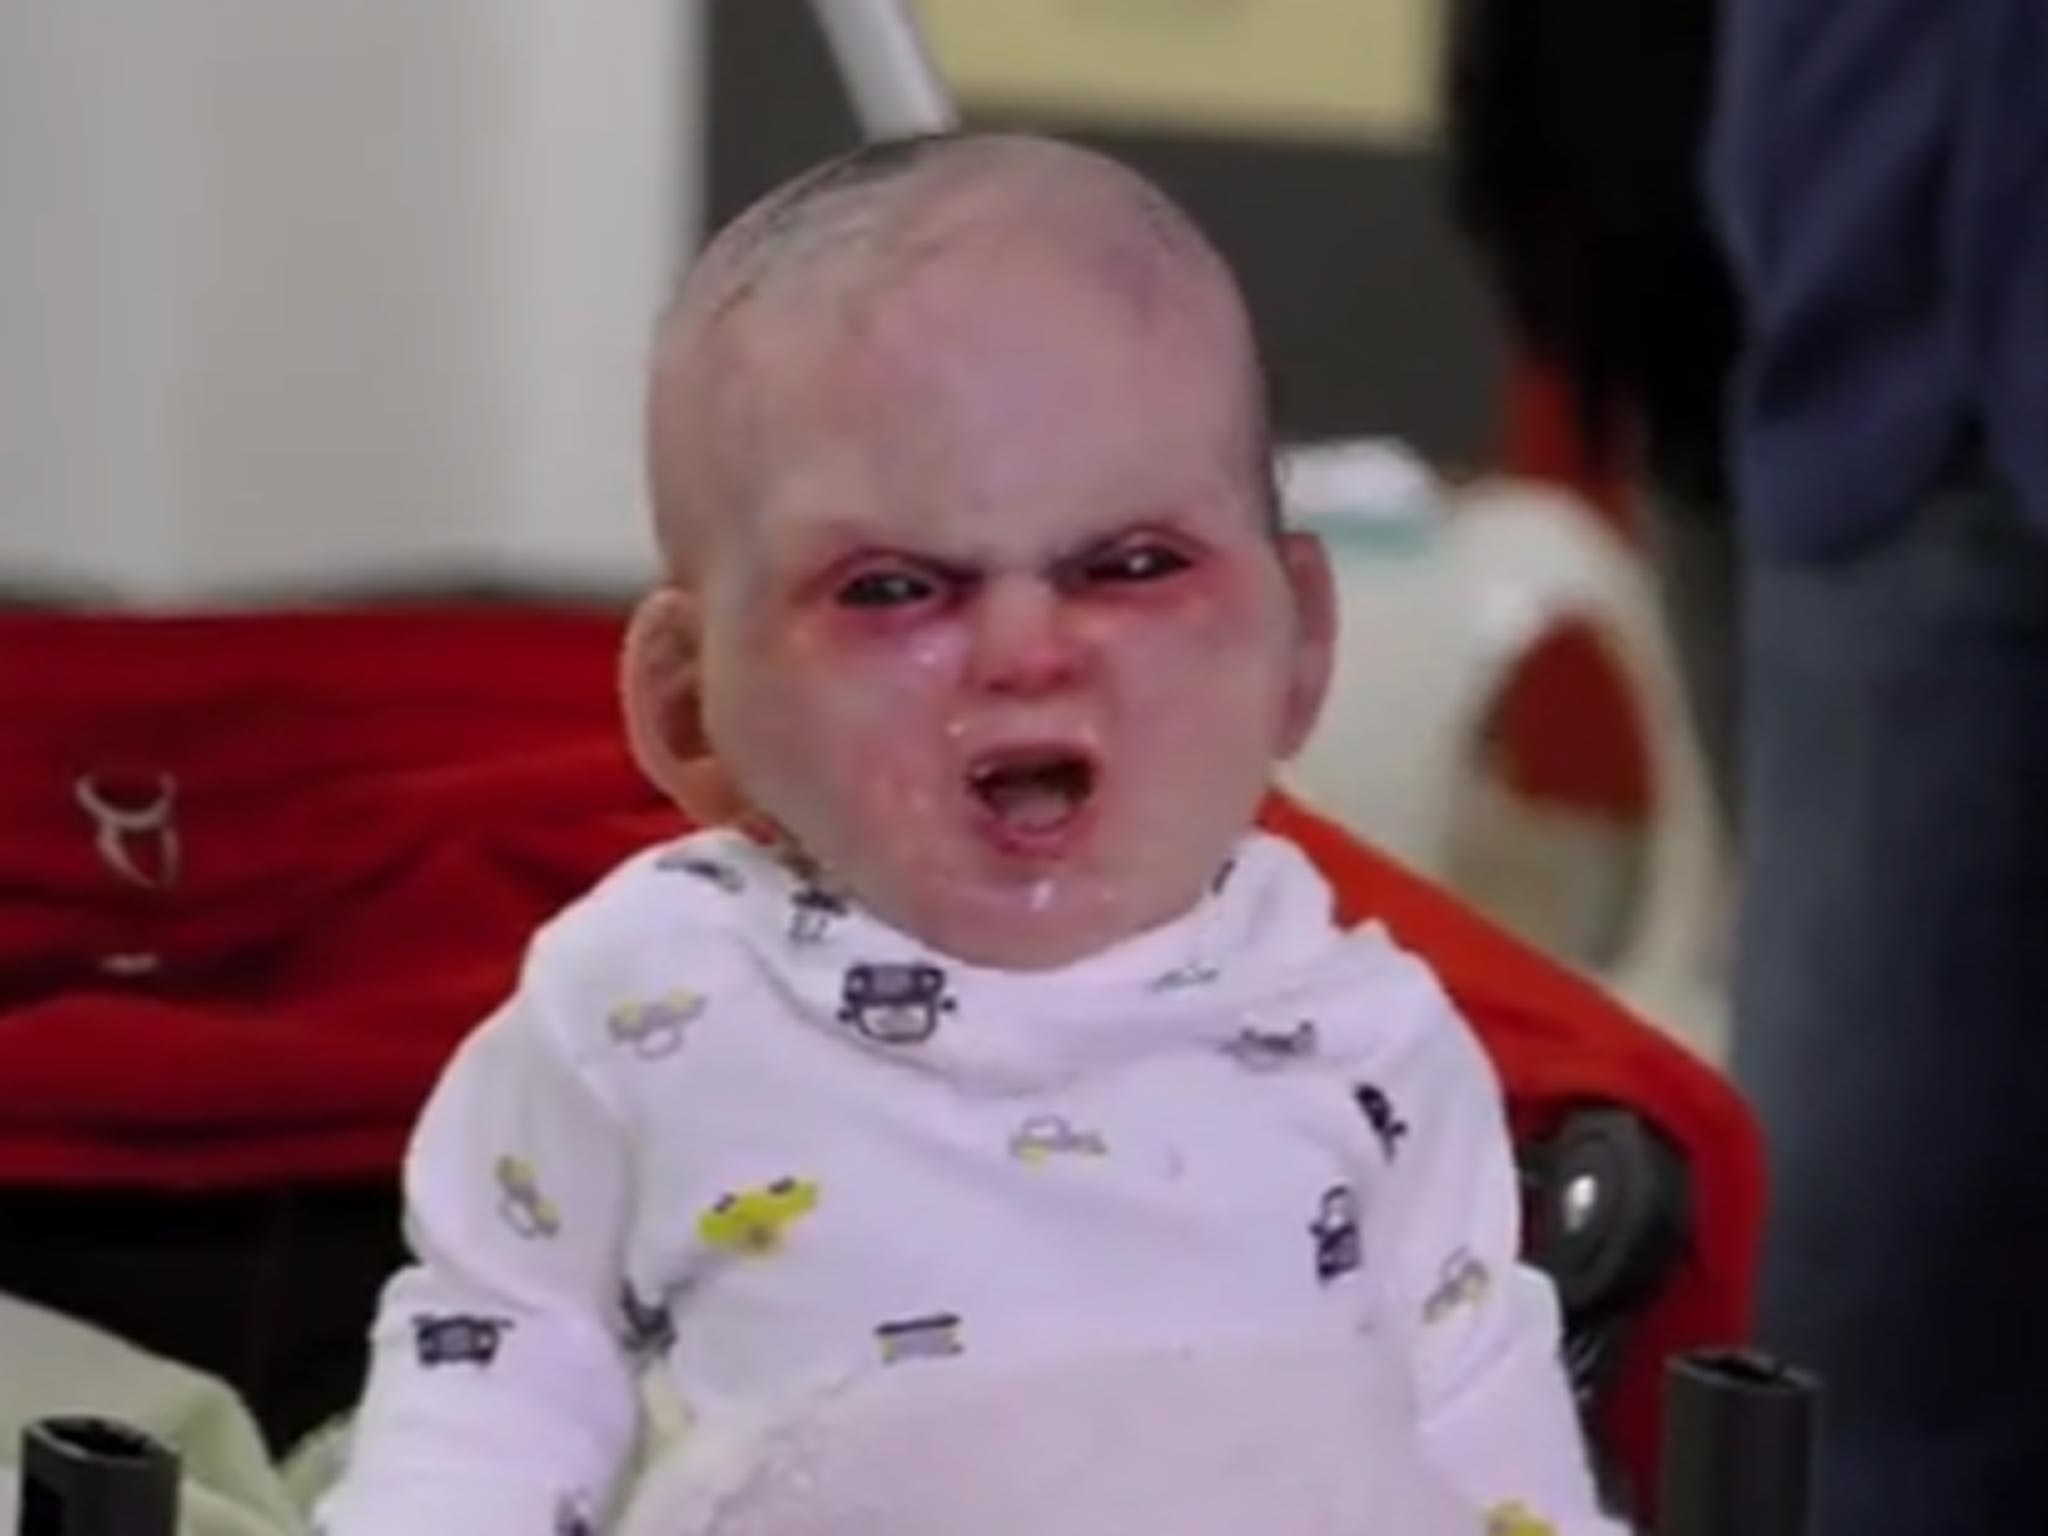 The 'devil baby' looks truly terrifying